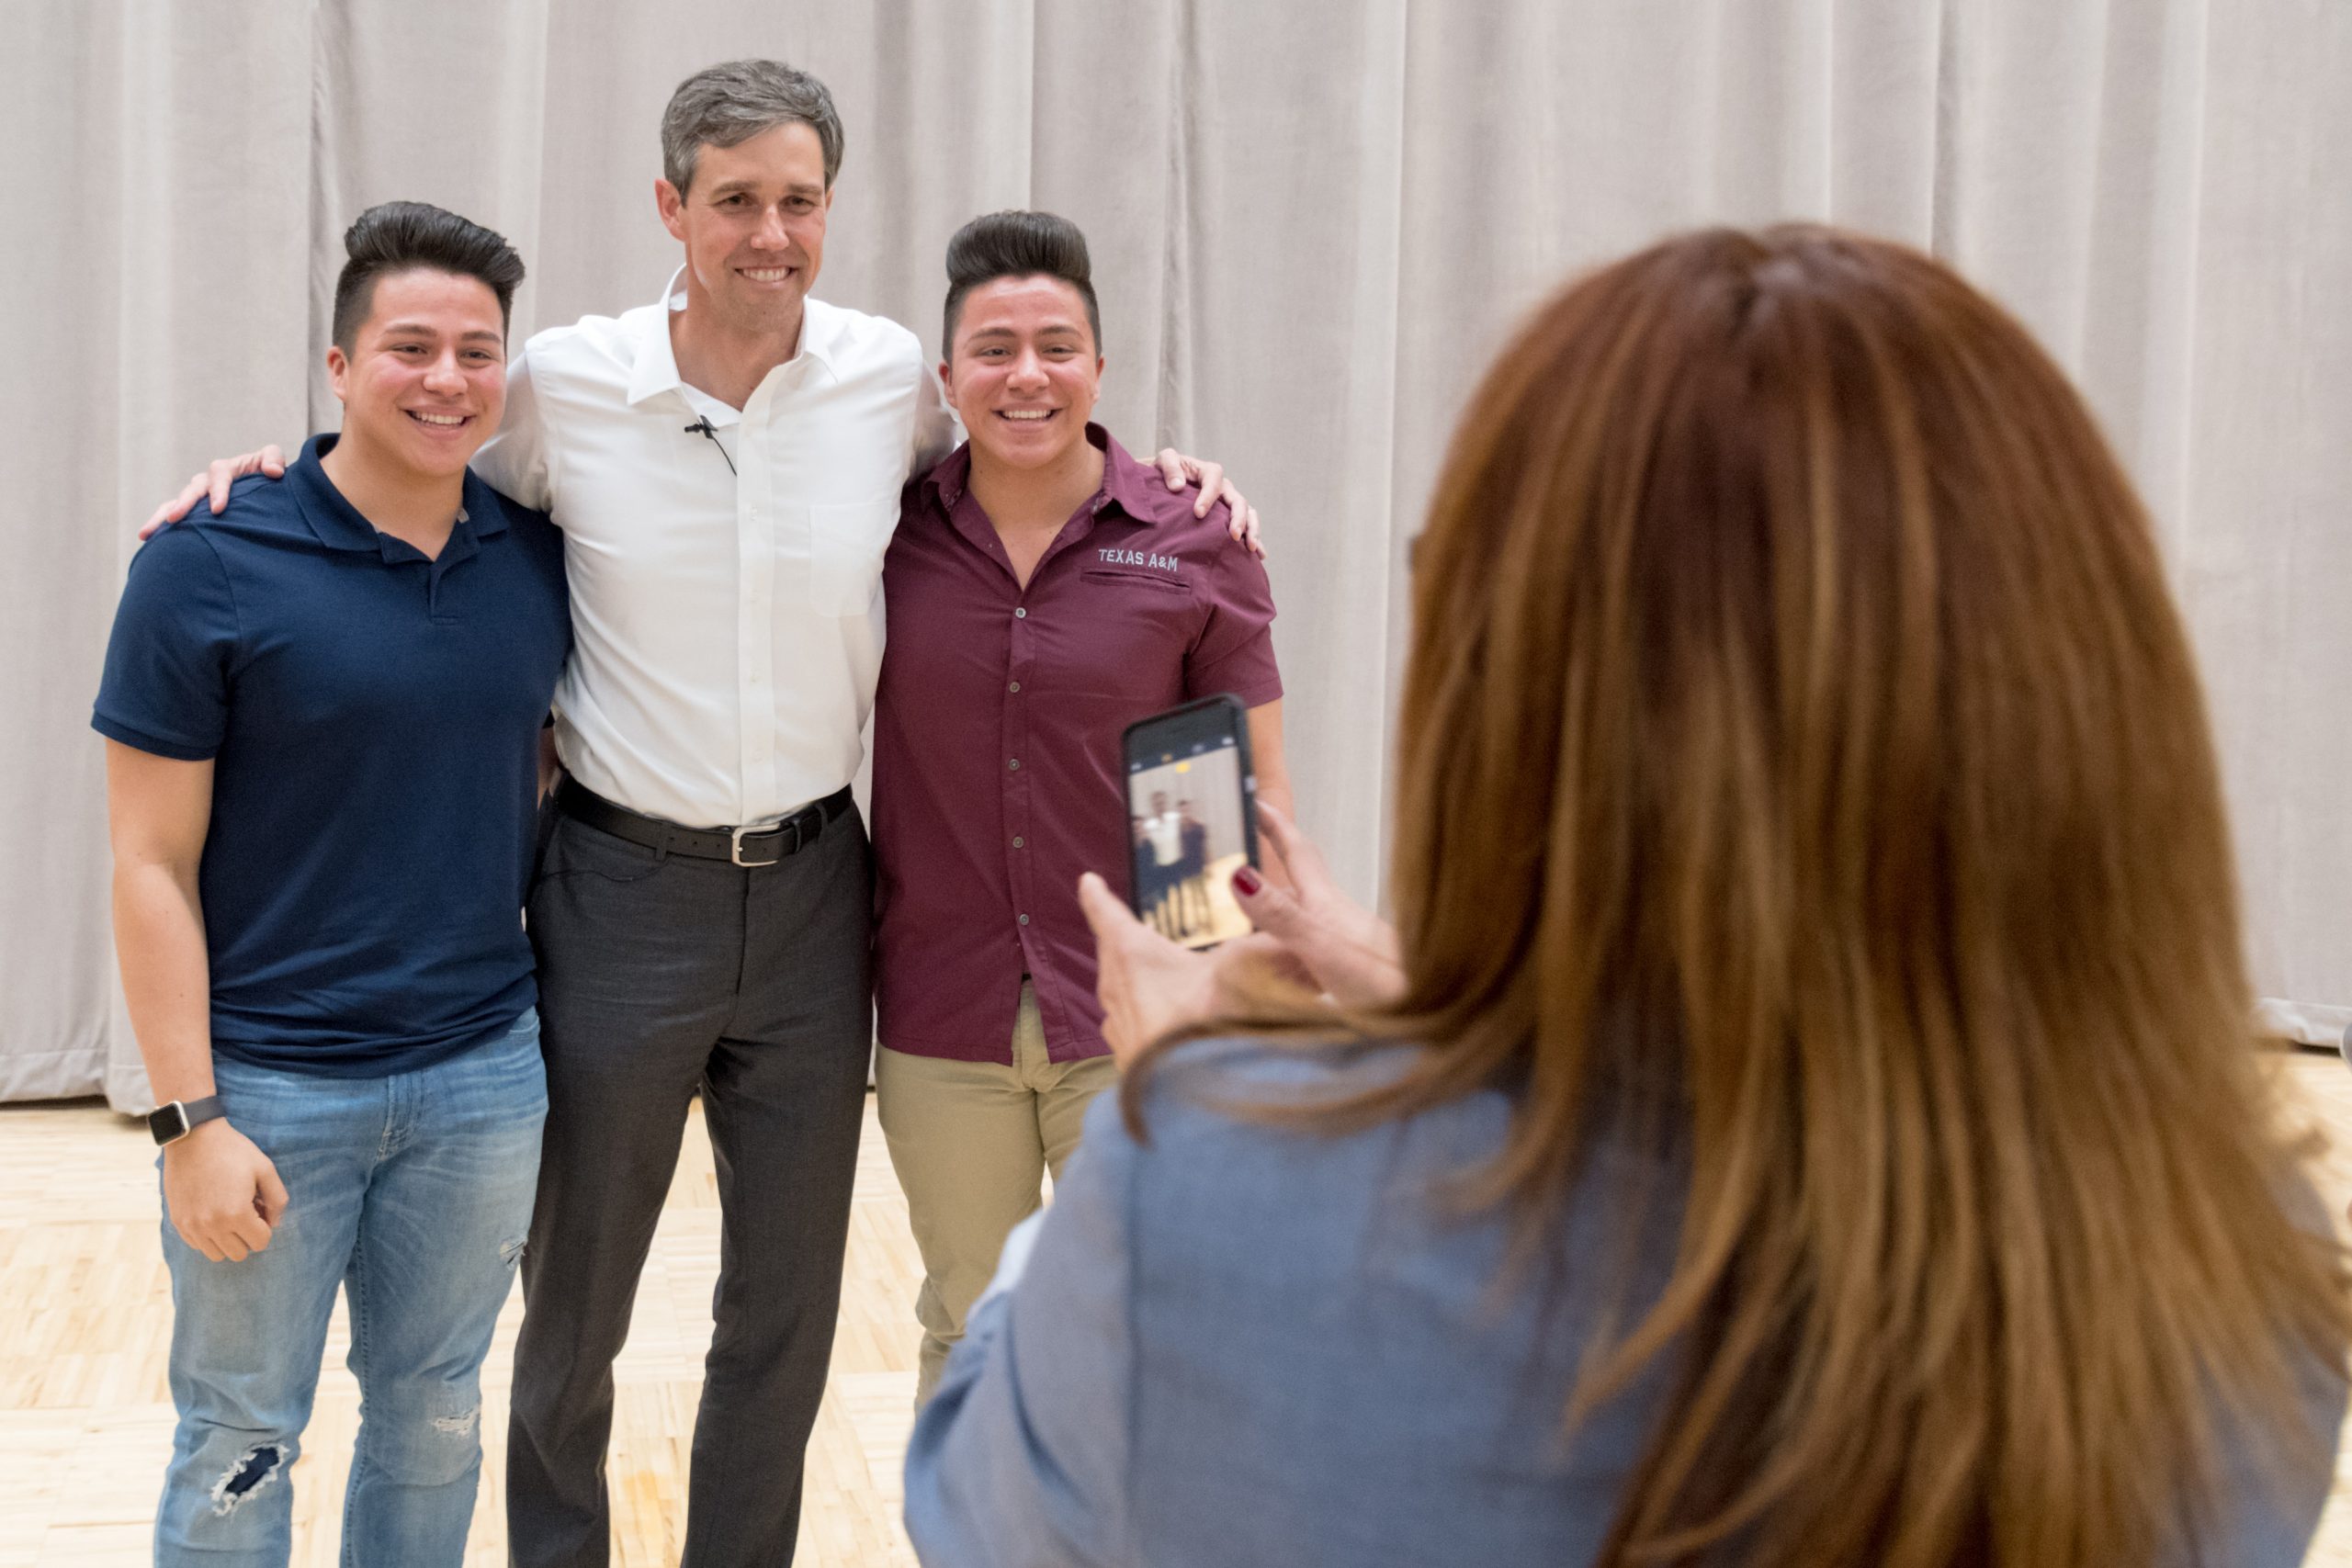 Town+Hall+with+Beto+ORourke